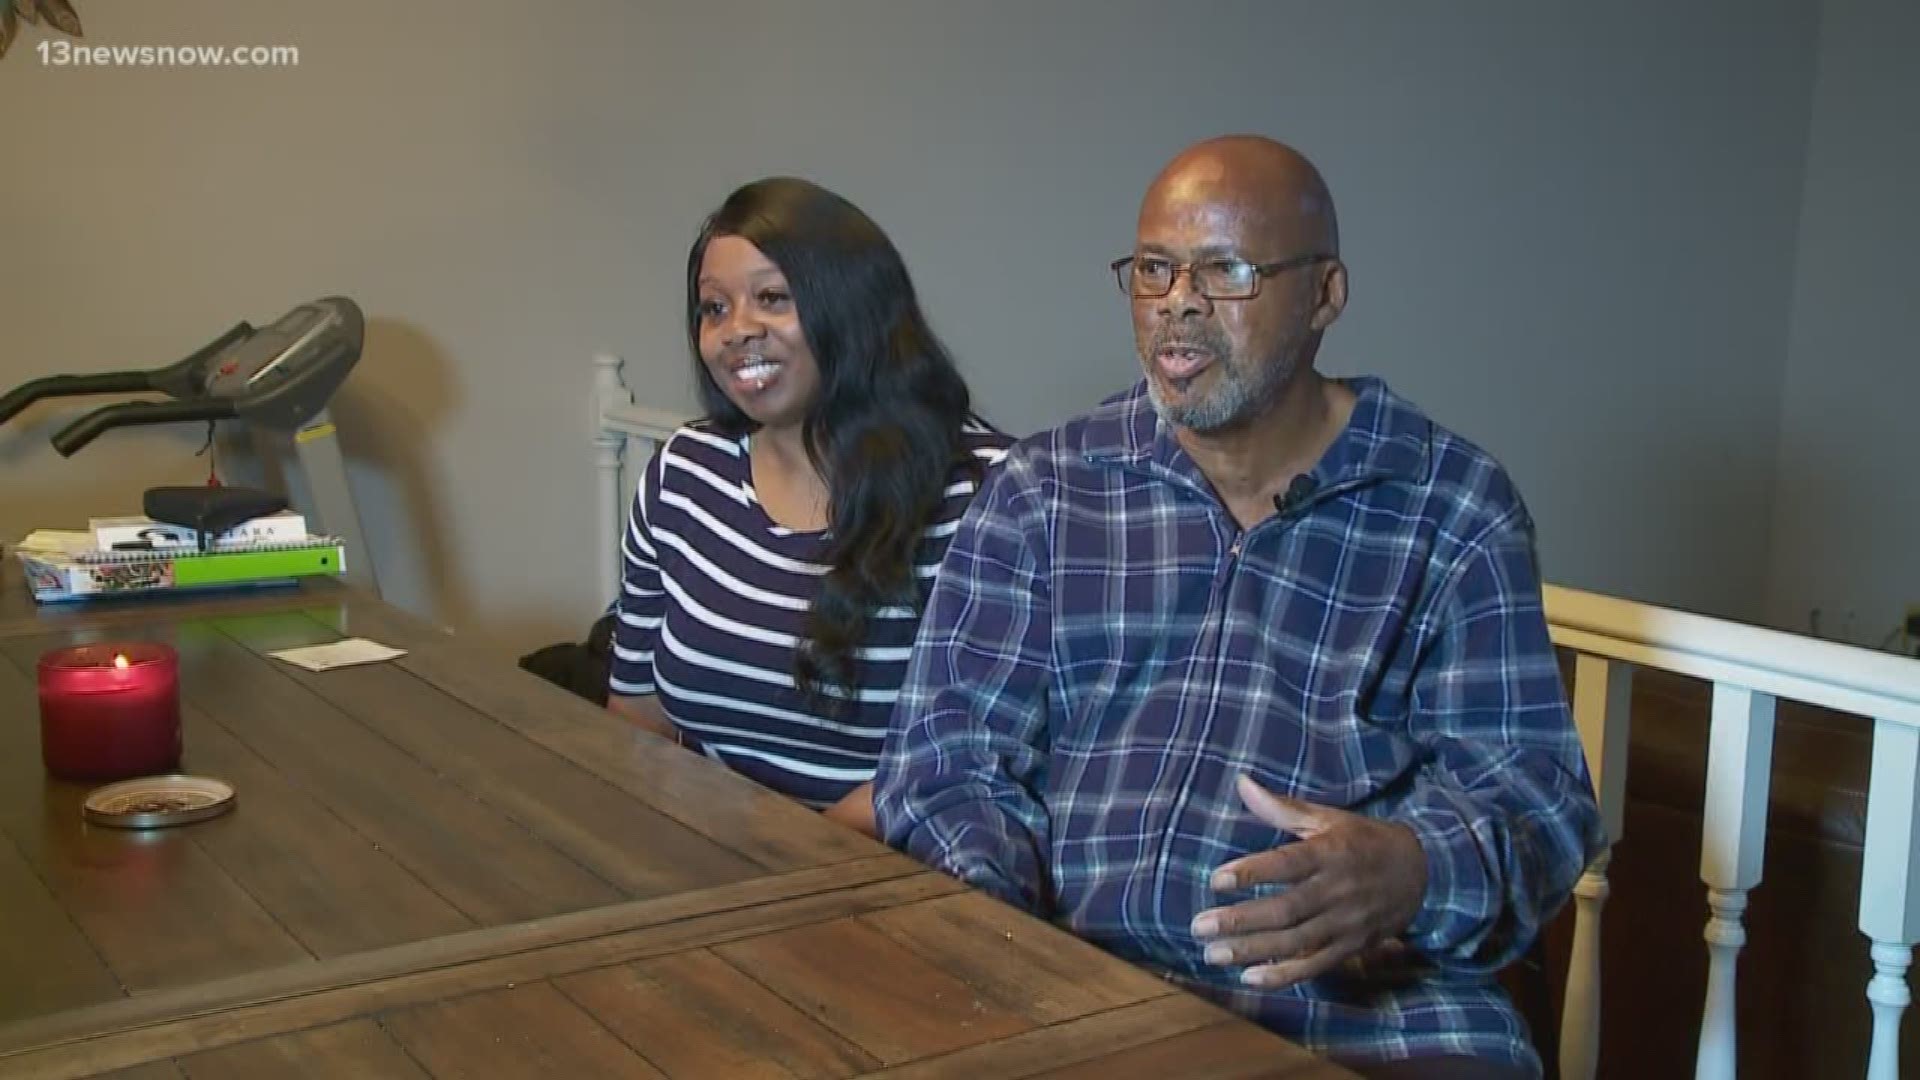 The kidney transplant for Reginald Jones came just in time for him to walk his daughter down the aisle at her wedding. 13News Now Chenue Her has more.